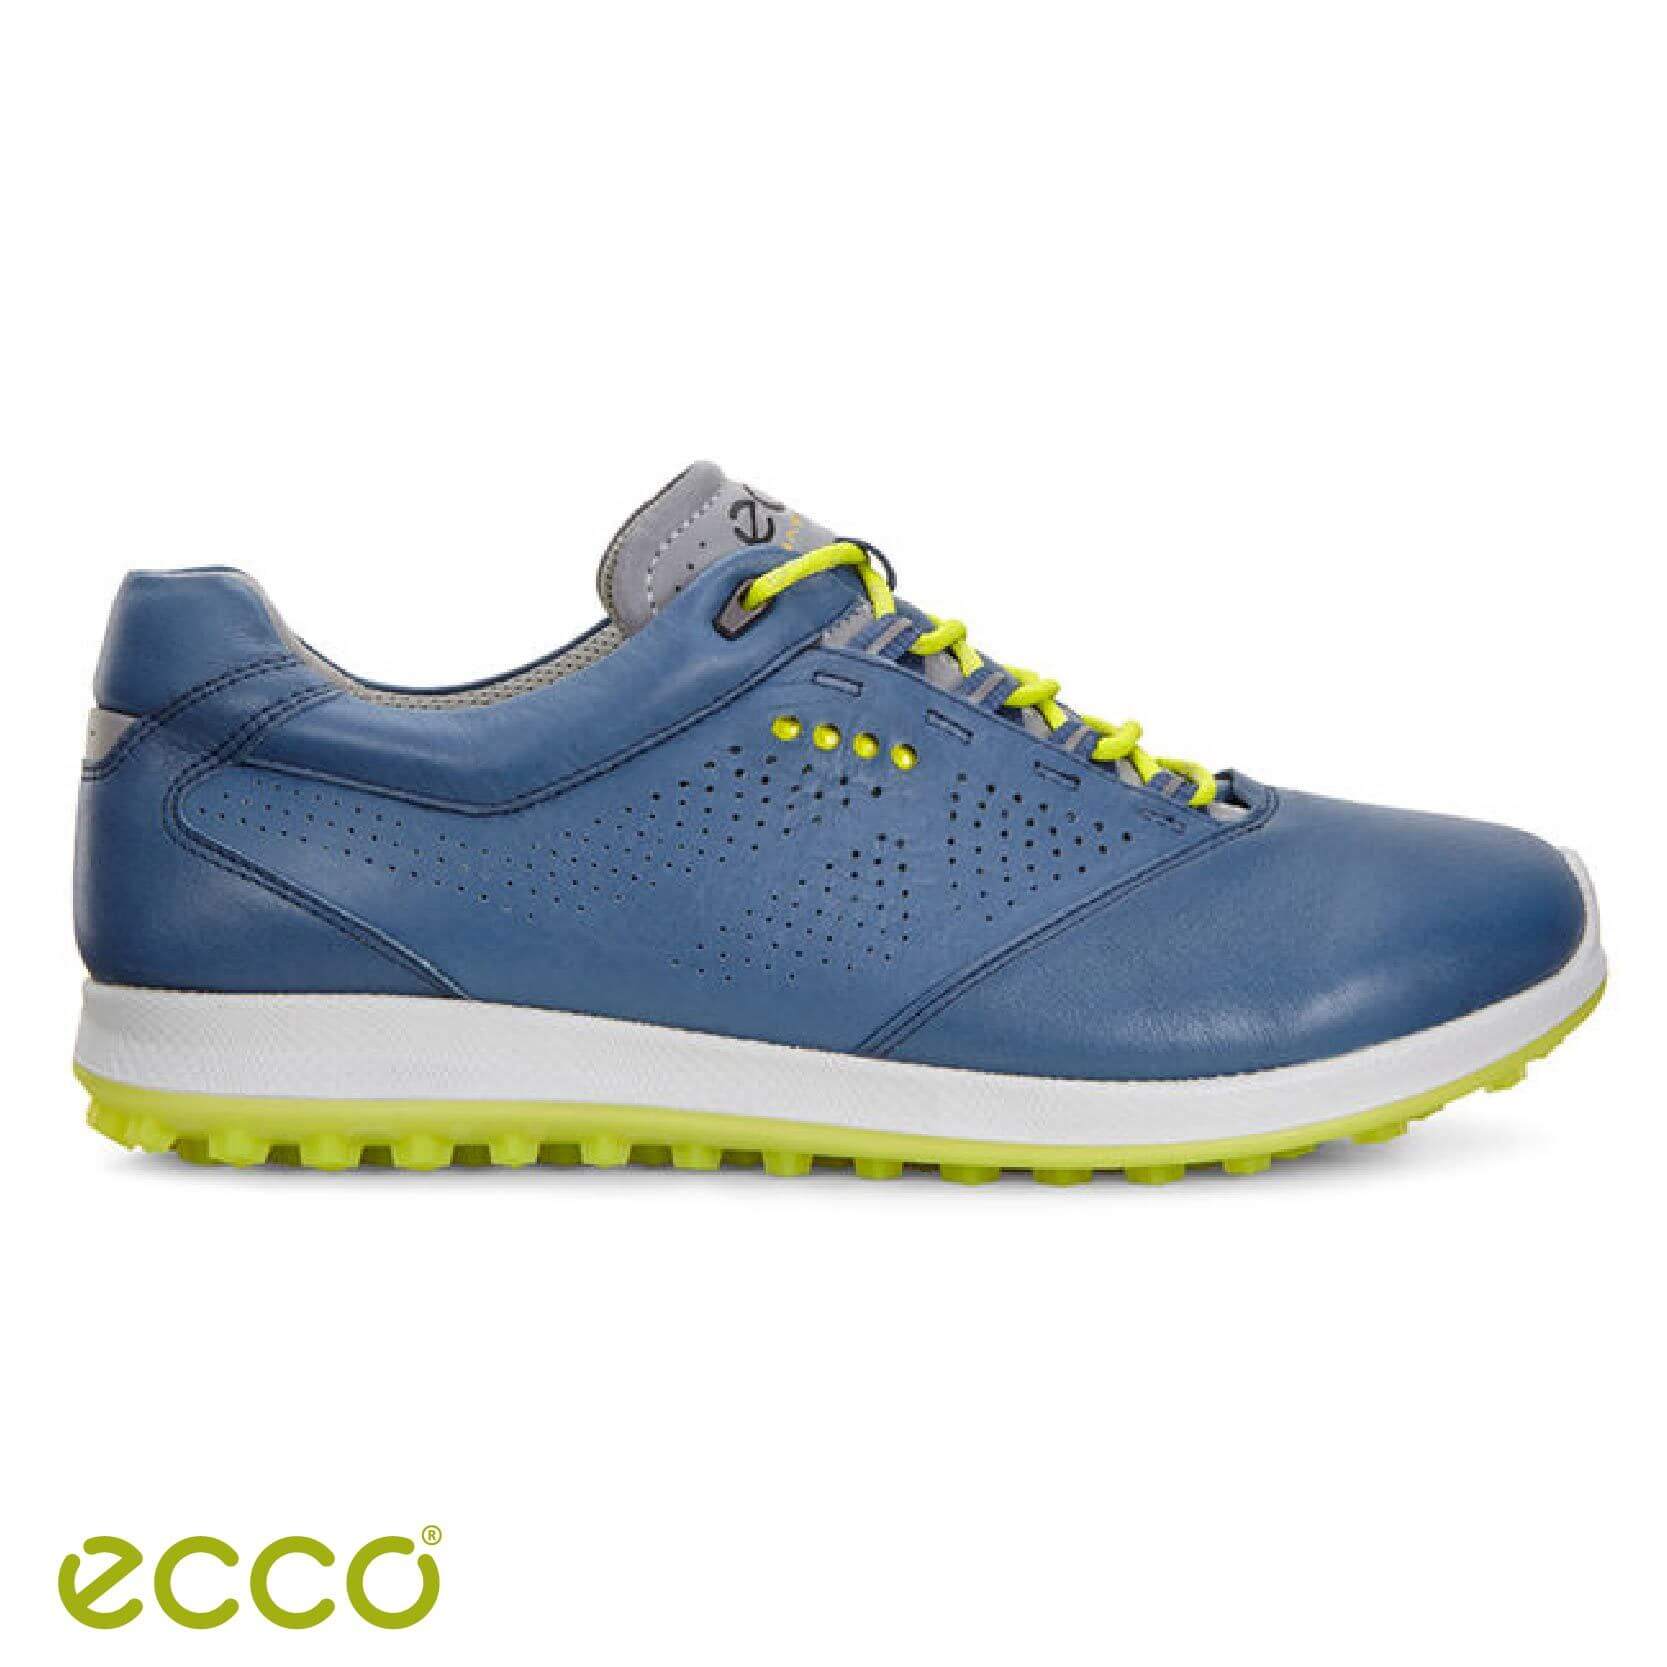 BIOM H2 GOLF SHOE AT CAPITAL GOLF FROM Ecco